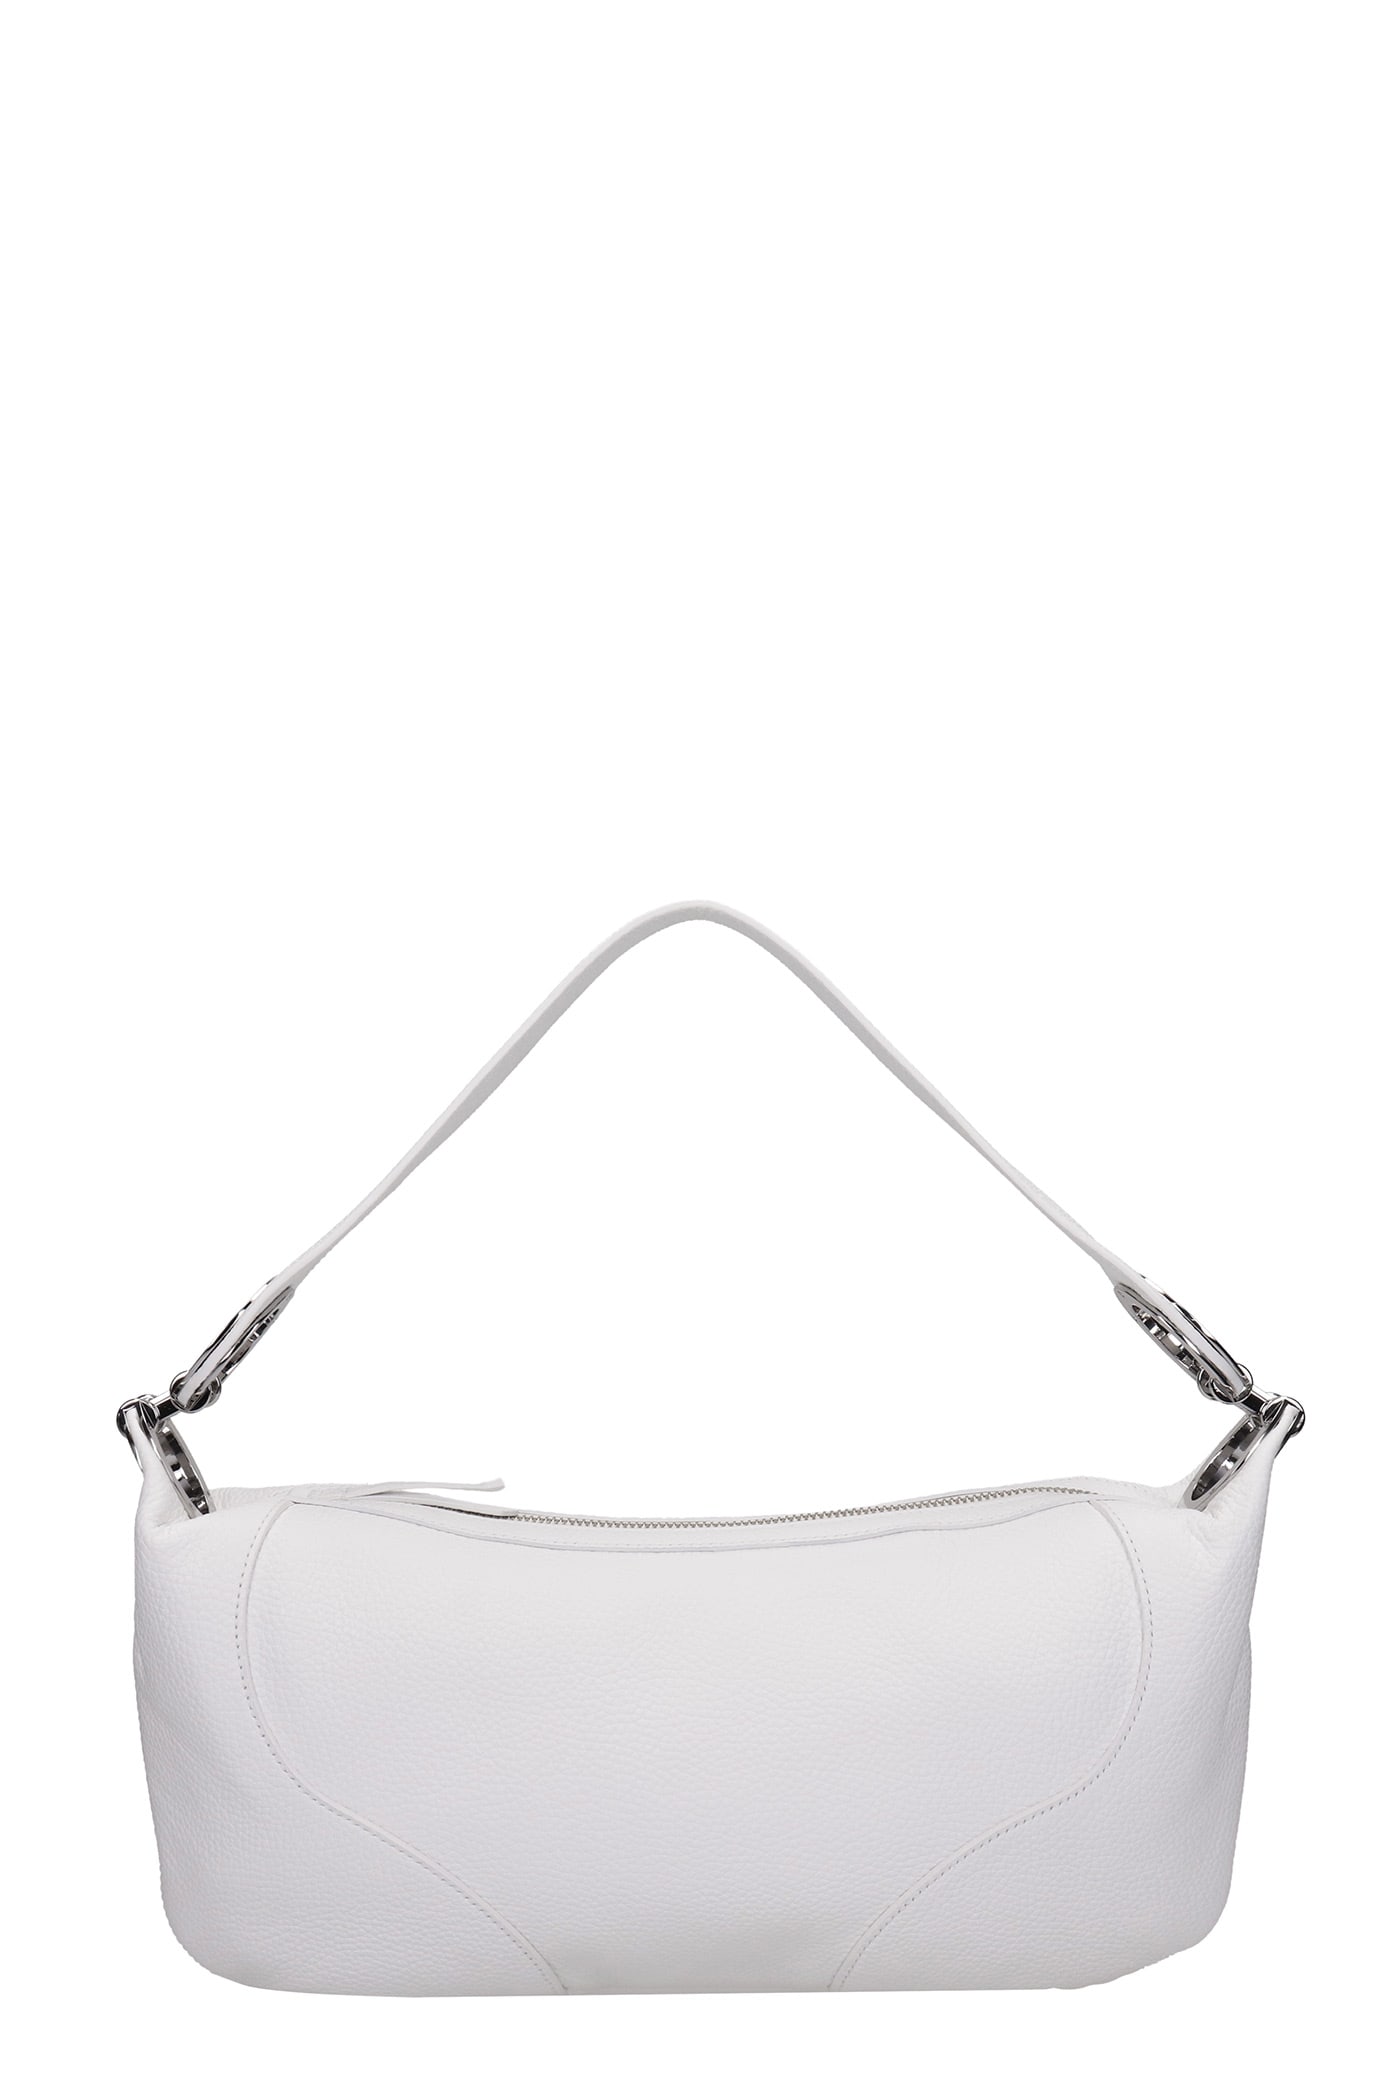 BY FAR Shoulder Bag In White Leather